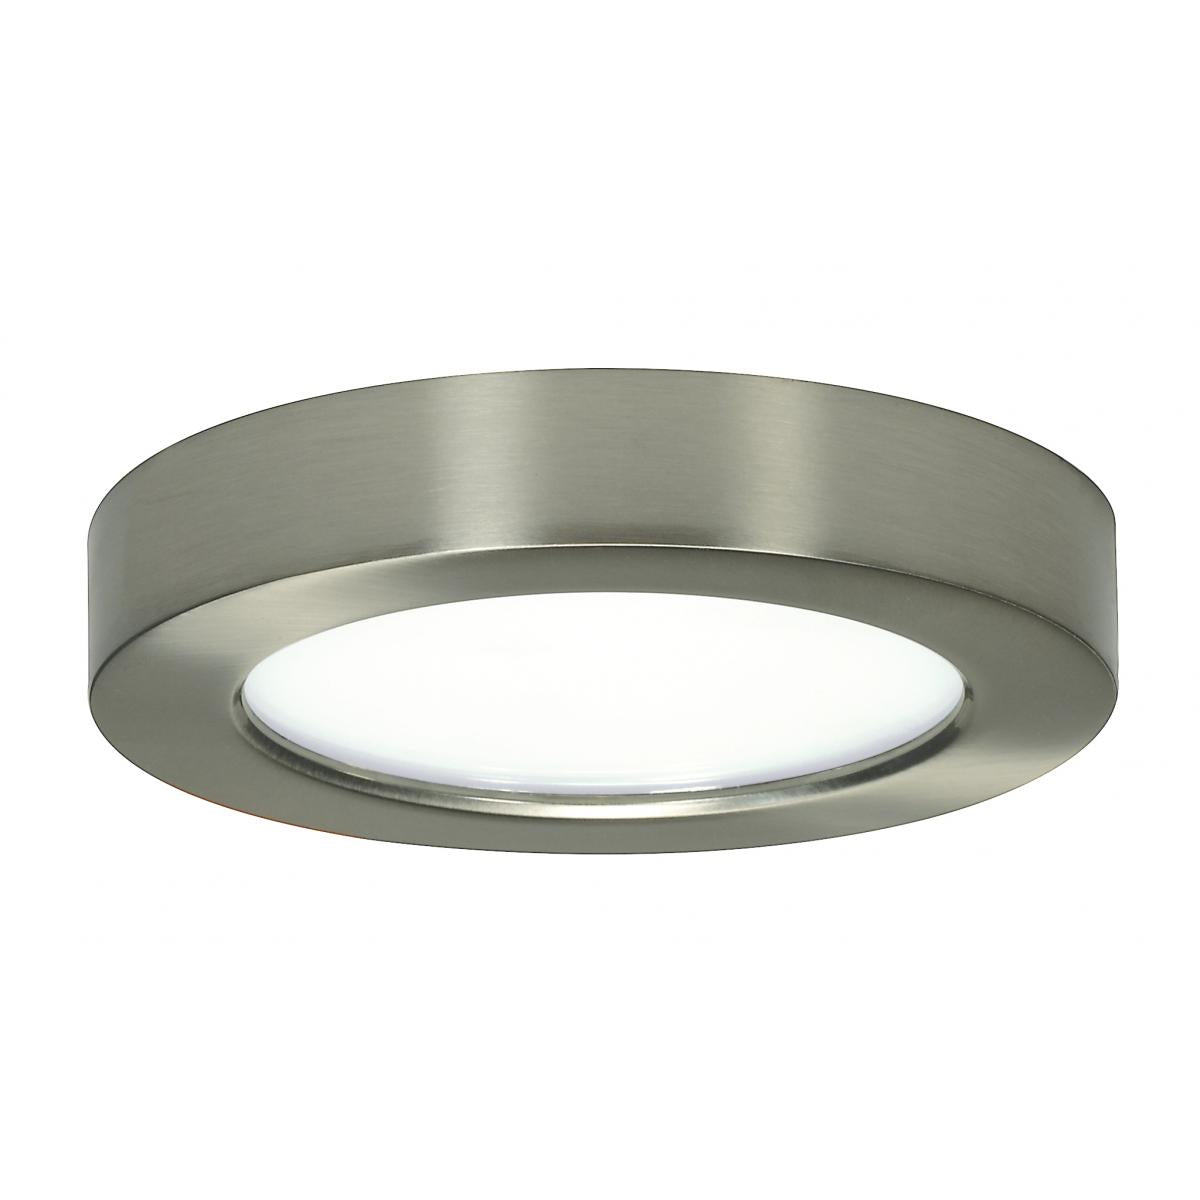 SATCO-S29321SATCO S29320 10W 5.5" Round LED Surface Mount 27K/30K